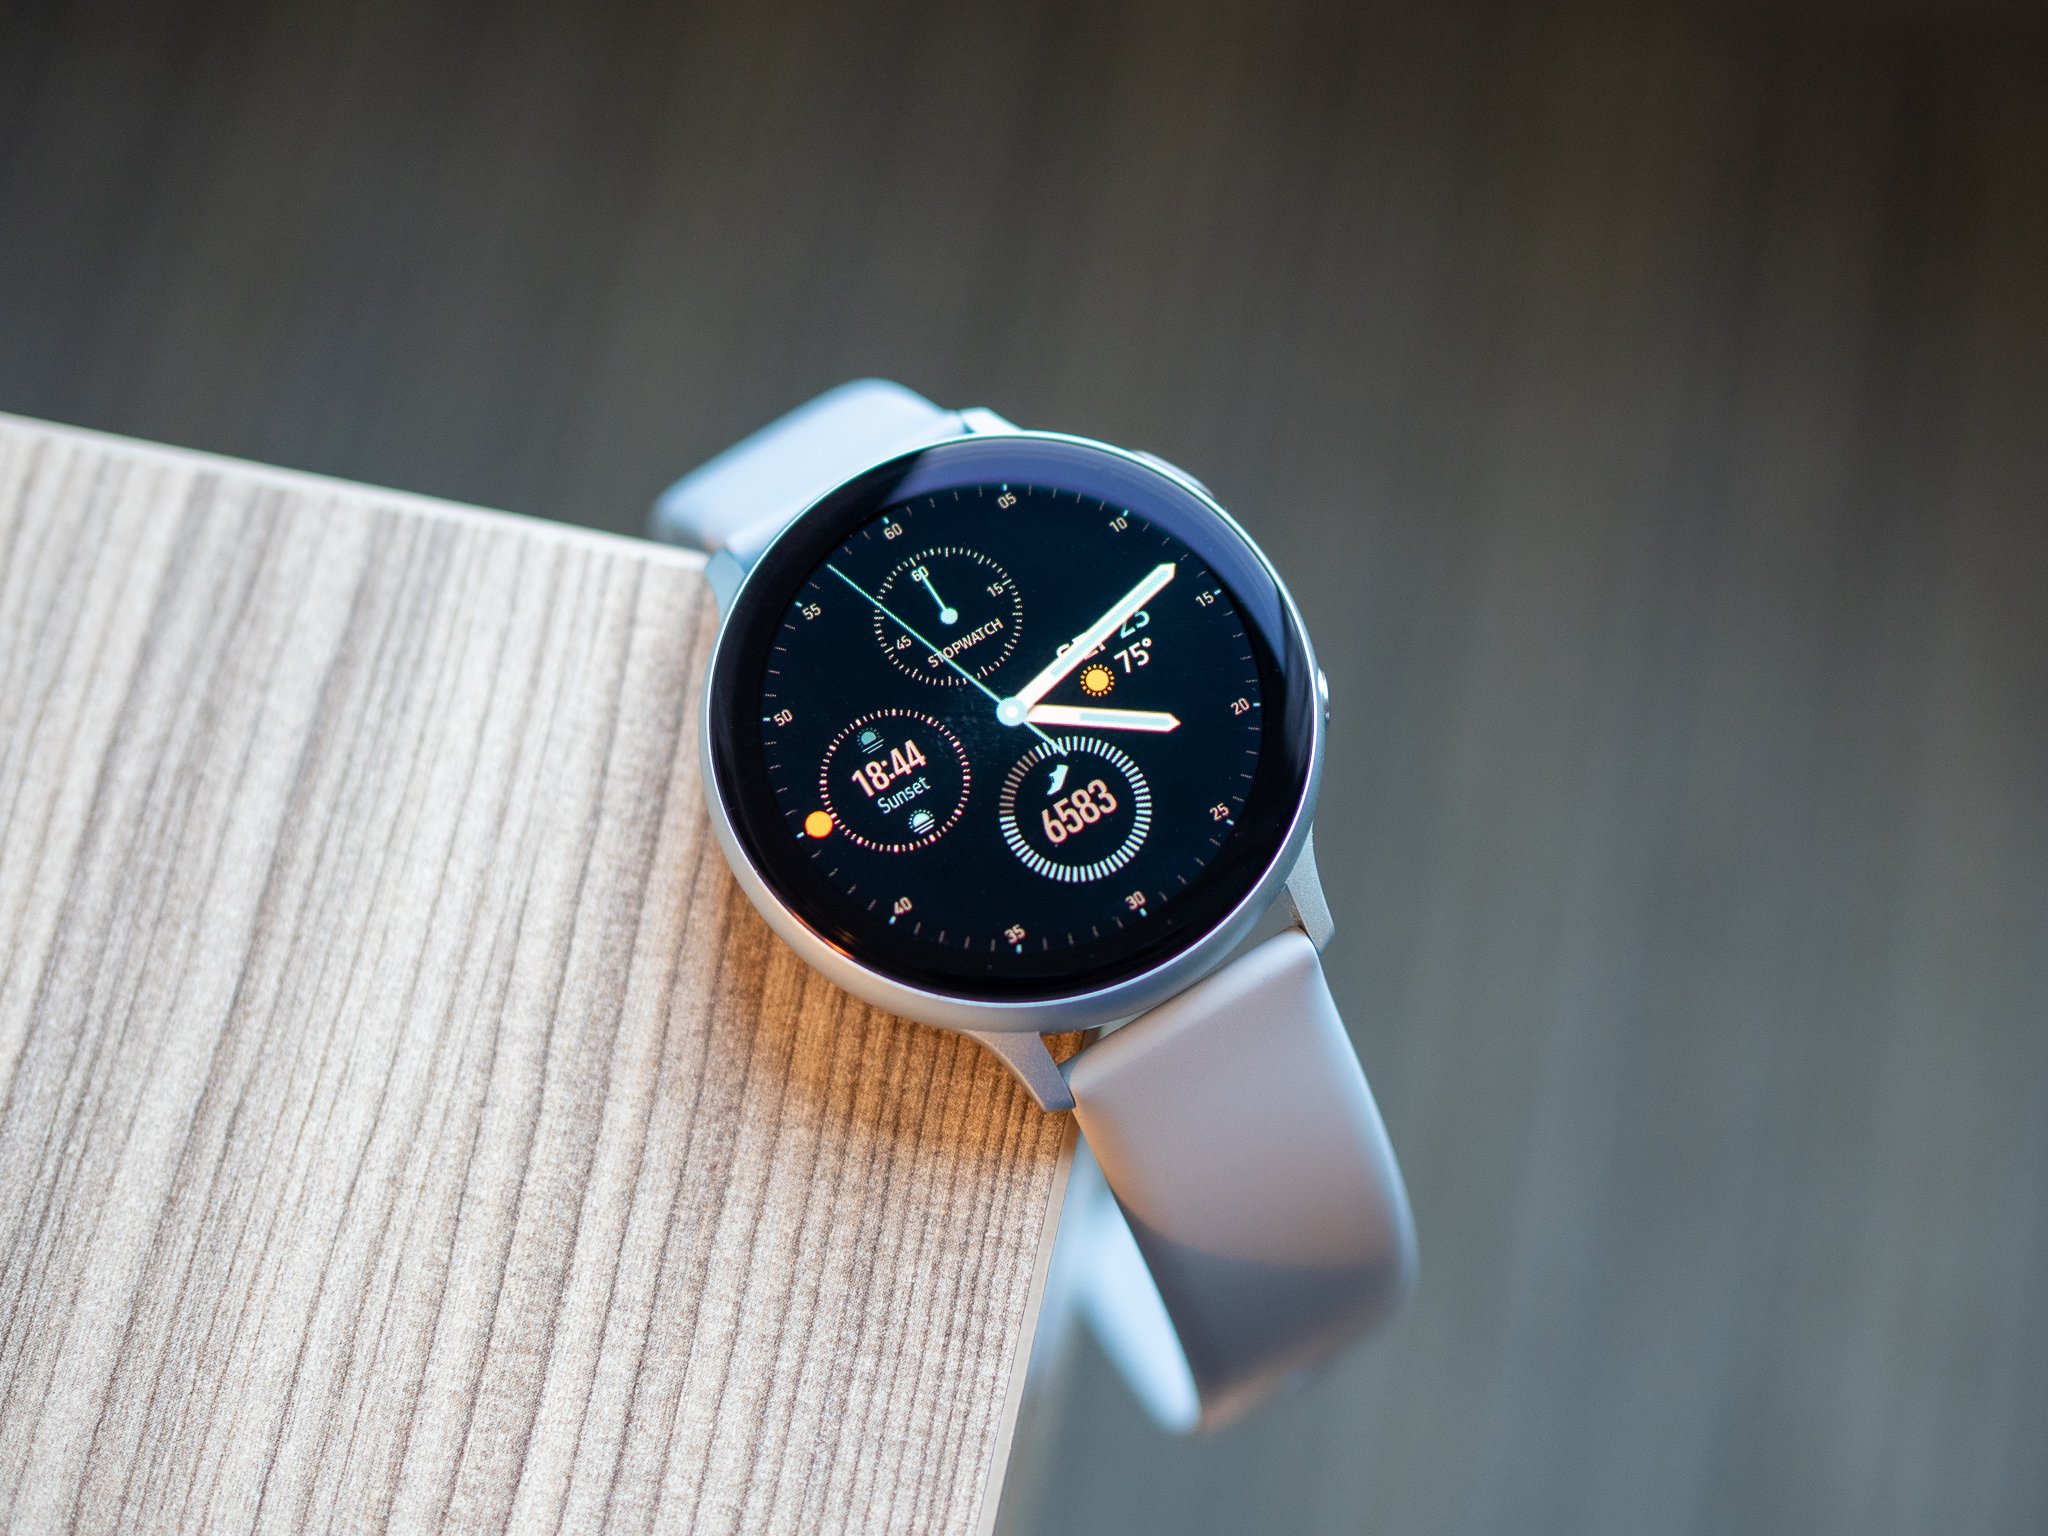 The Samsung Galaxy Watch Active 2 is the best Android wearable, and it